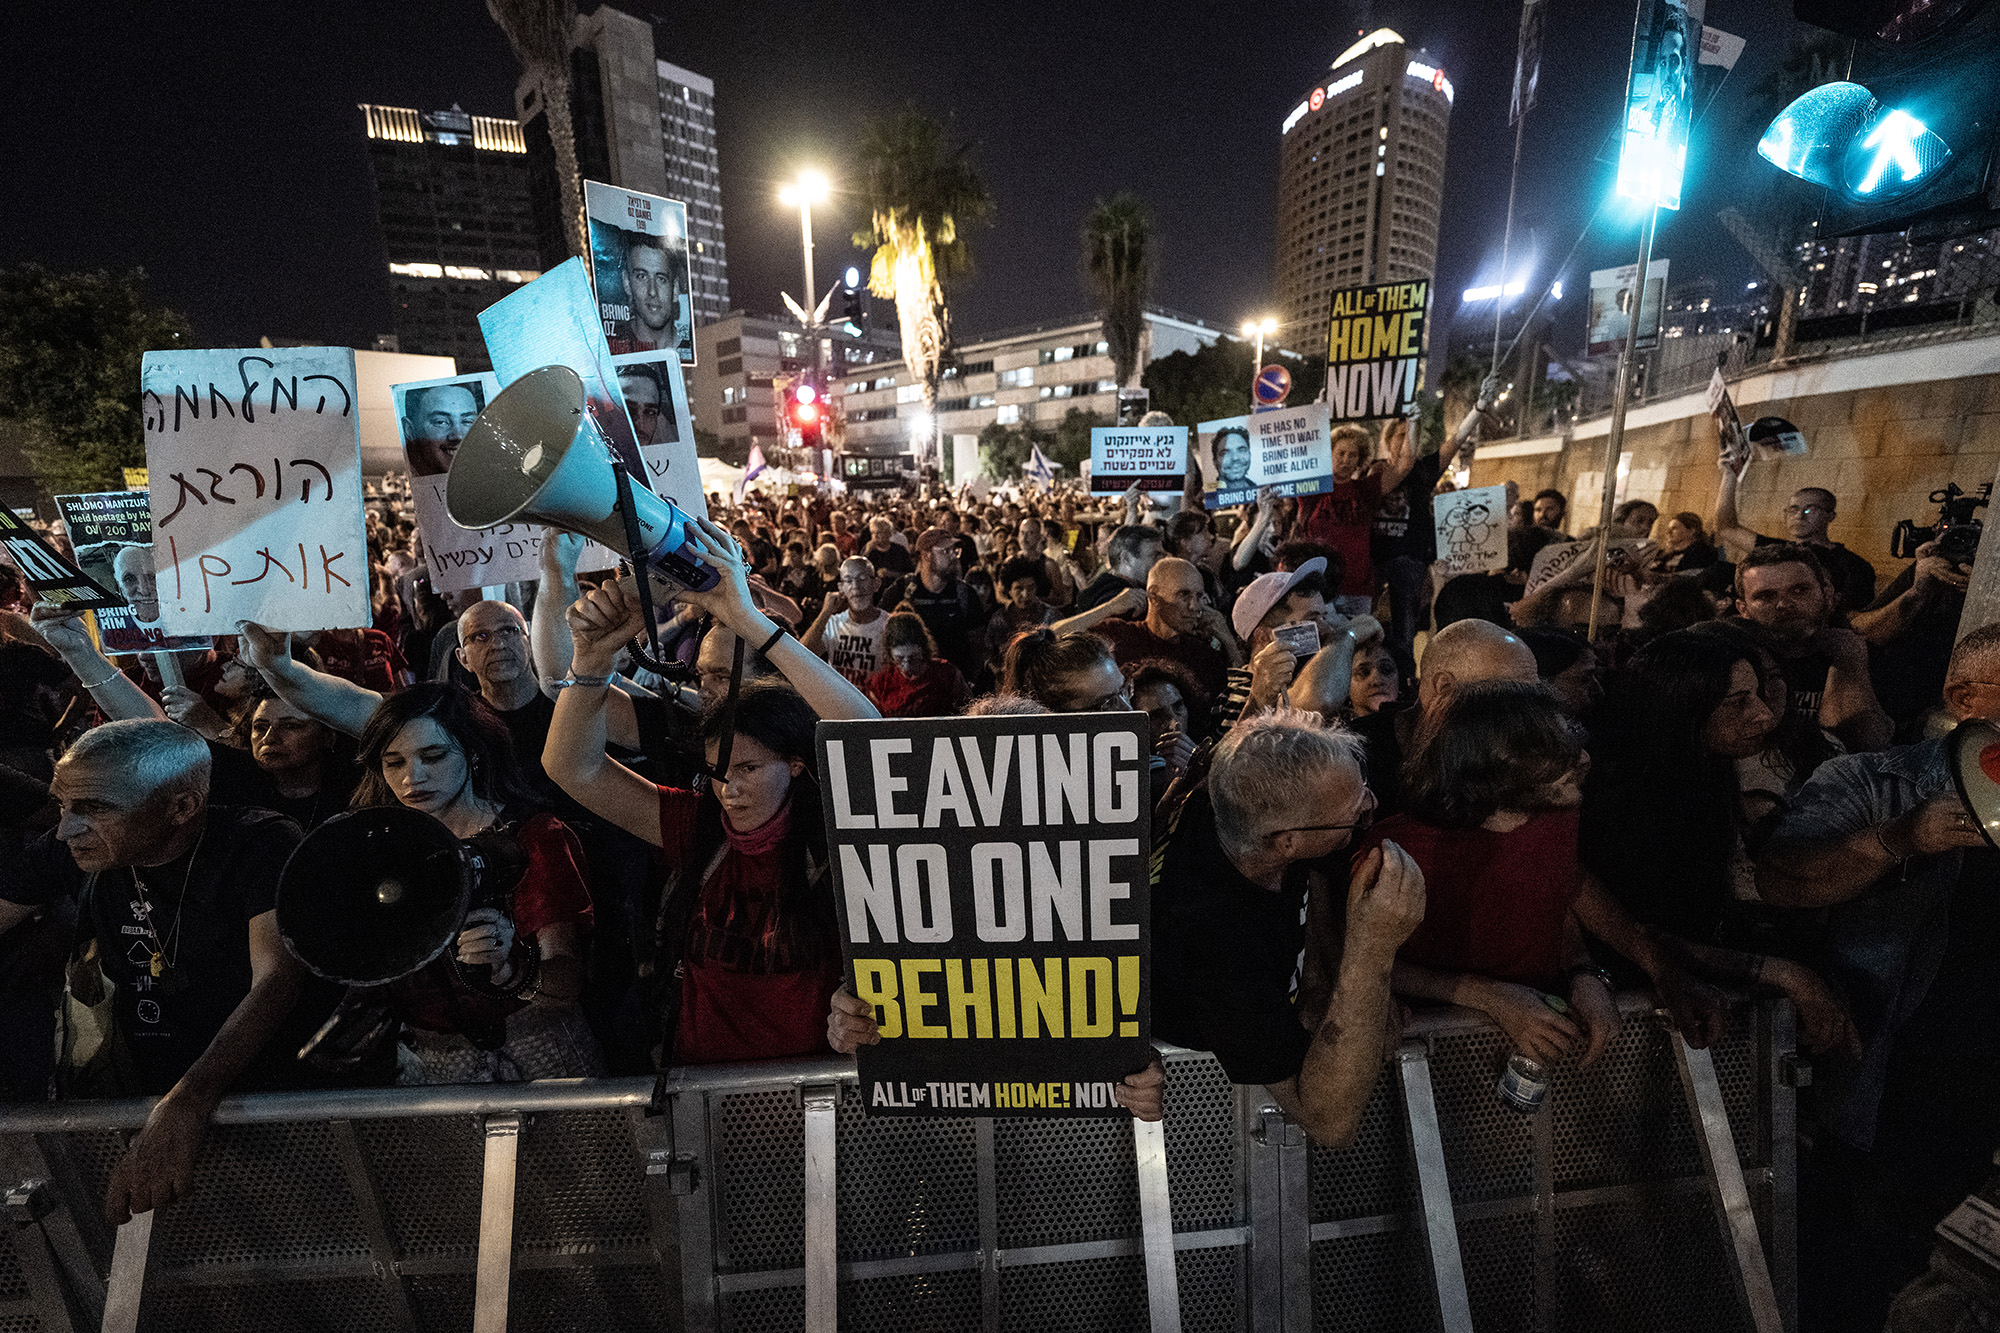 Israeli's gather to stage a protest against the government of Prime Minister Binyamin Netanyahu and the immediate return of hostages, in front of the Defense Ministry building in Tel Aviv, Israel on April 23.